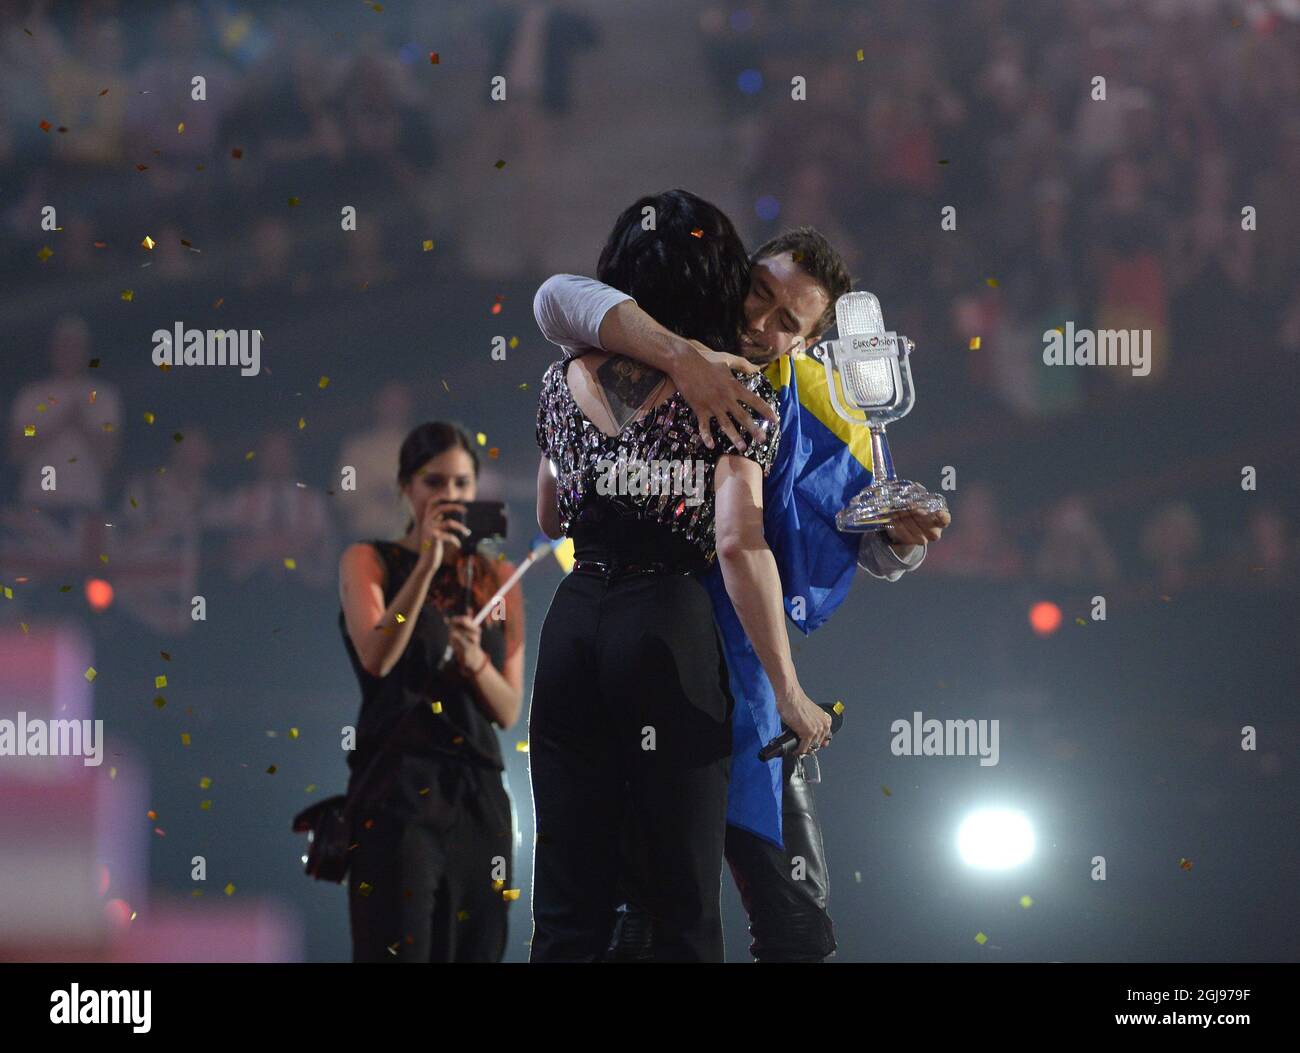 WIEN 20150523 The winner of the ESC 2014 Conchita Wurst congratulates and passes over the trophy to Mans Zelmerloew representing Sweden who celebrates winning the final of the Eurovision Song Contest 2015 in Vienna, Austria. Photo: Jessica Gow / TT / Kod 10070  Stock Photo